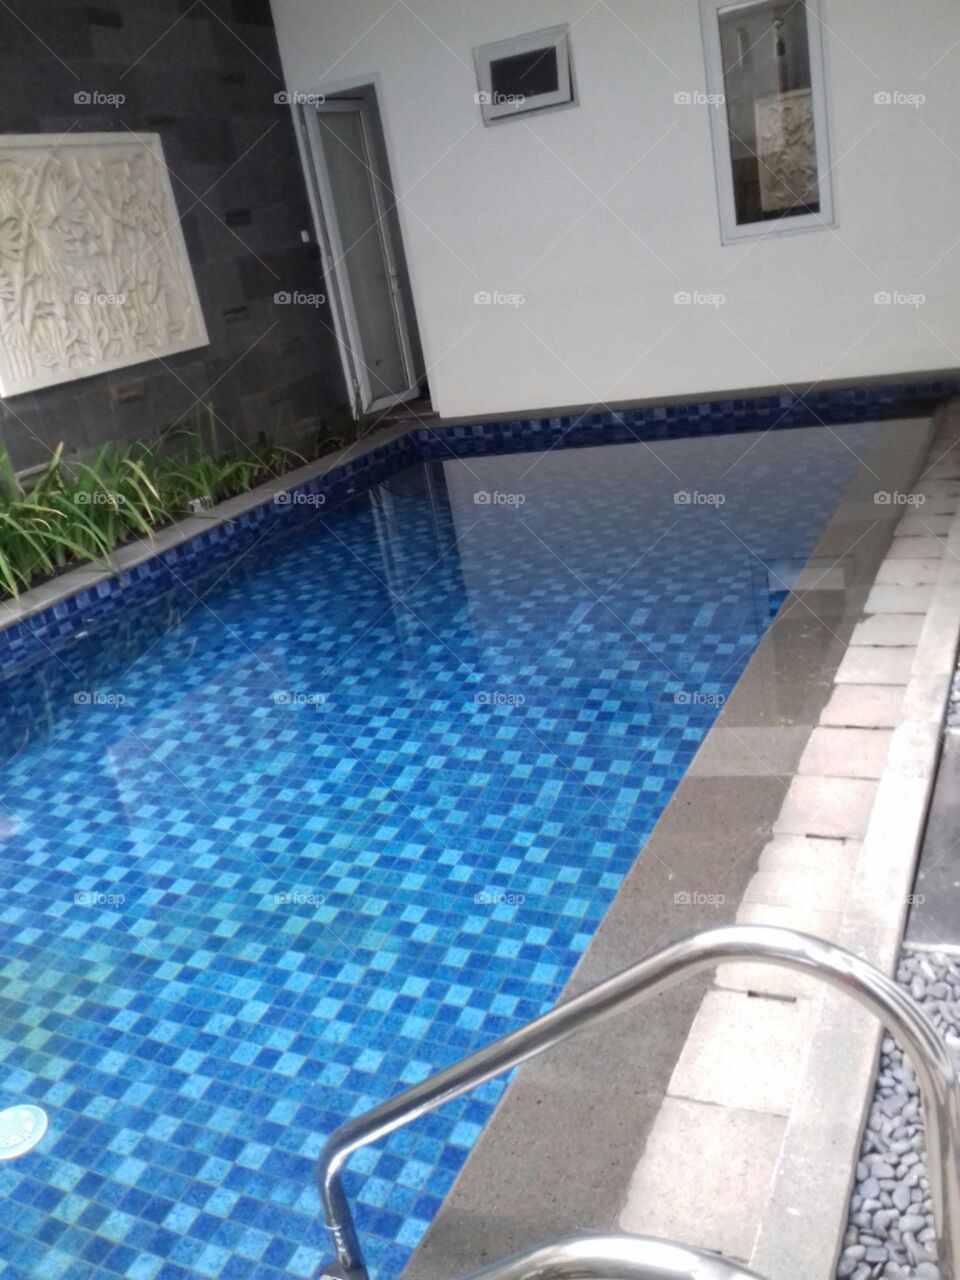 swmming pool for private